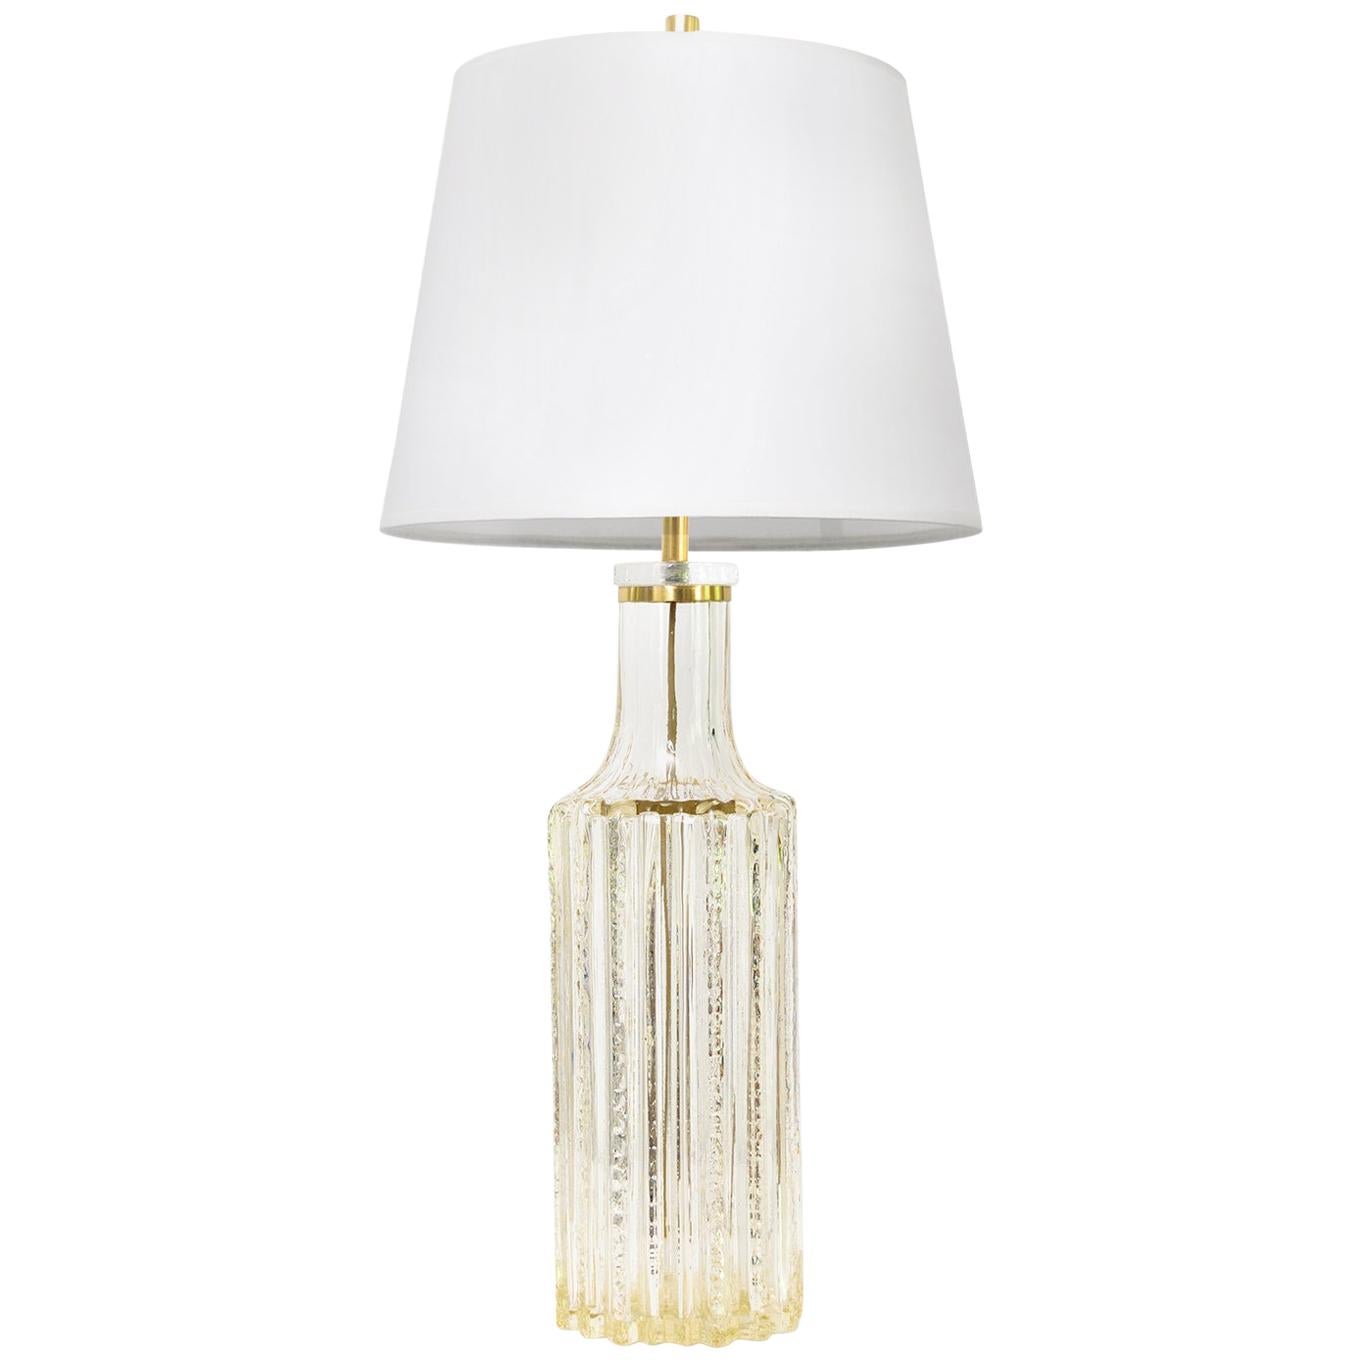 Scandinavian Modern Highly Textured Clear Glass Table Lamp with Brass Details